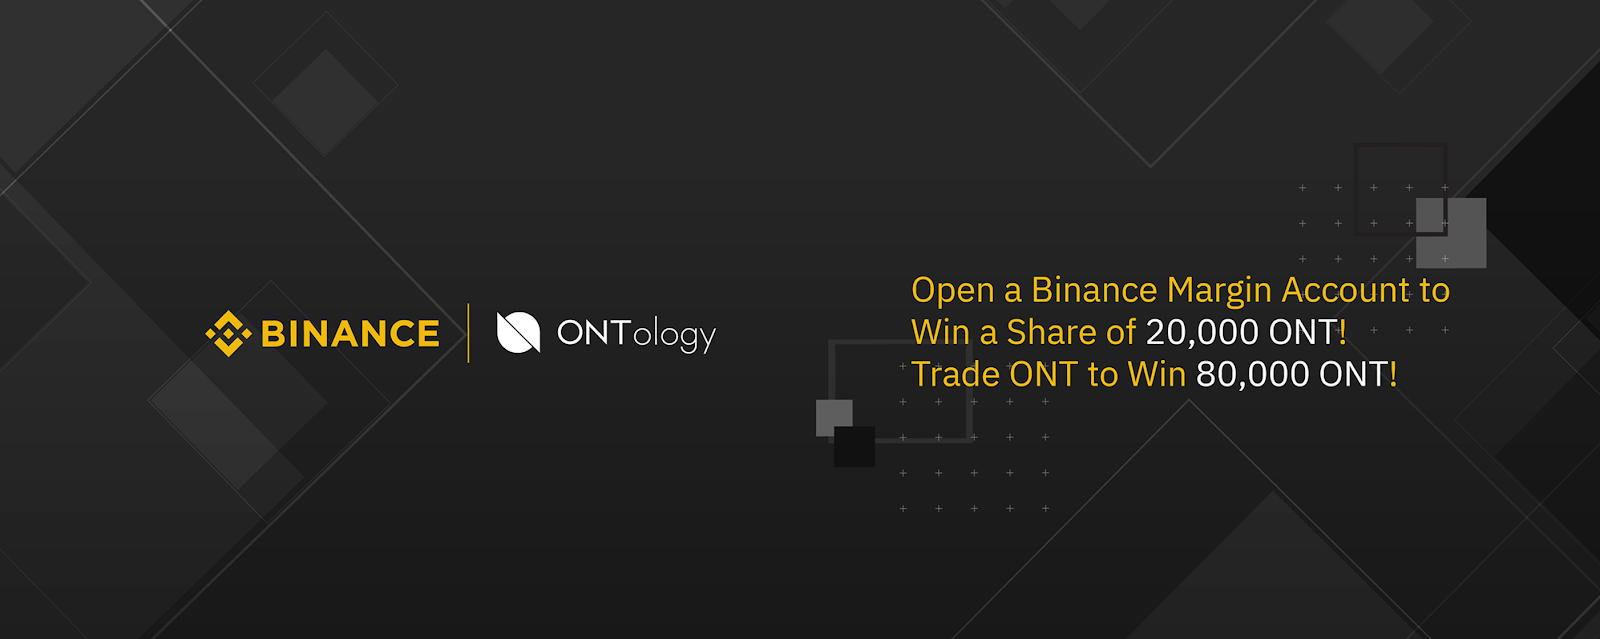 Open New Margin Account and Trade ONT to Win 80,000 ONT!